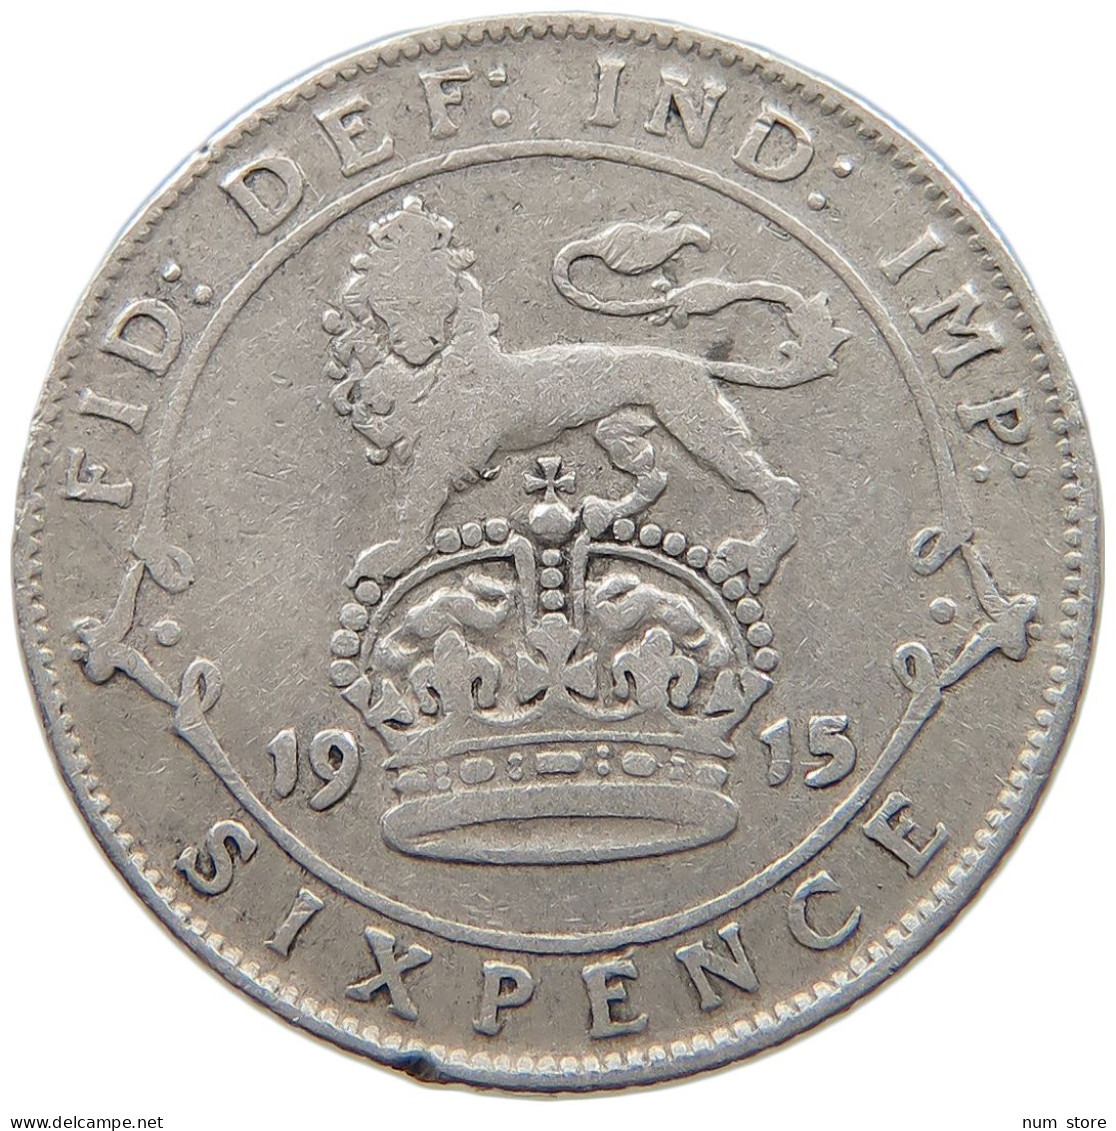 GREAT BRITAIN 6 SIXPENCE 1915 GEORGE V. (1910-1936) #MA 026013 - H. 6 Pence